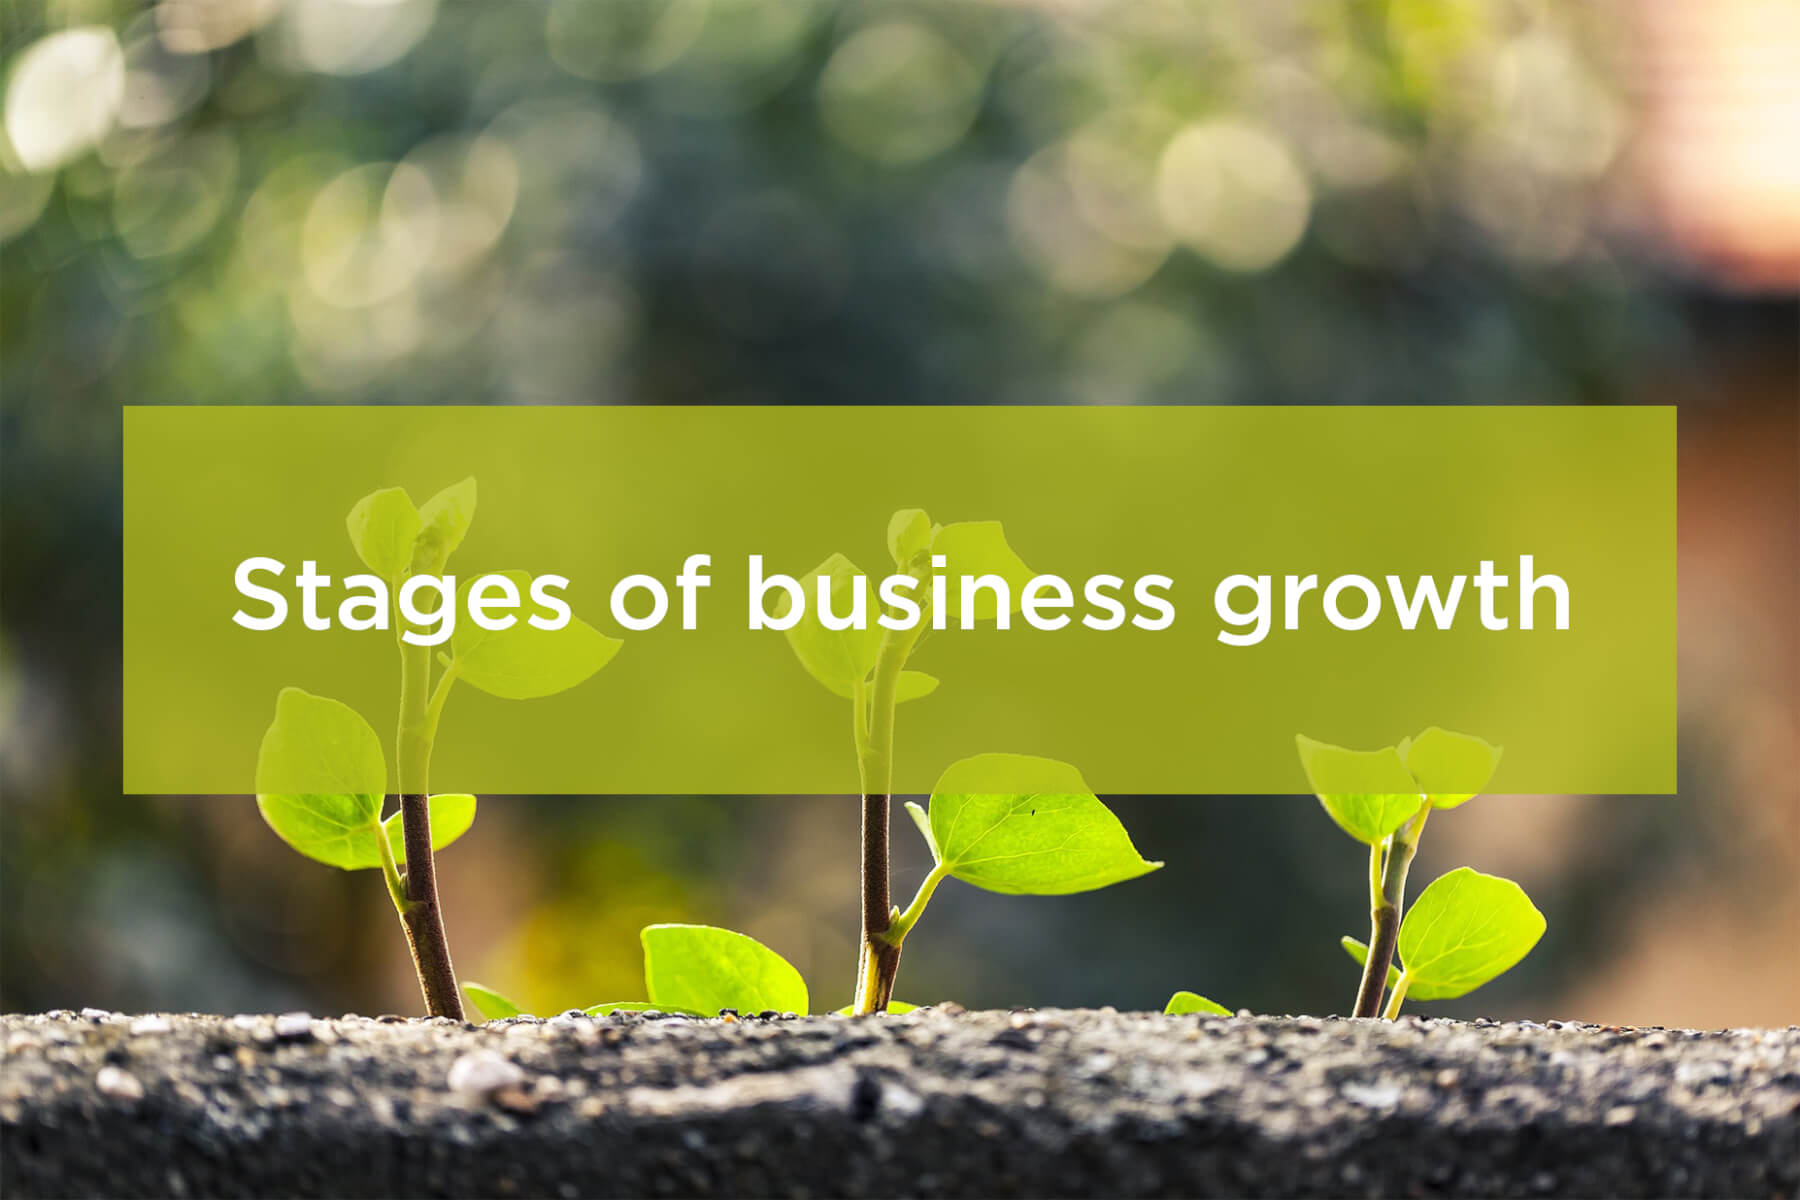 Stages of business growth